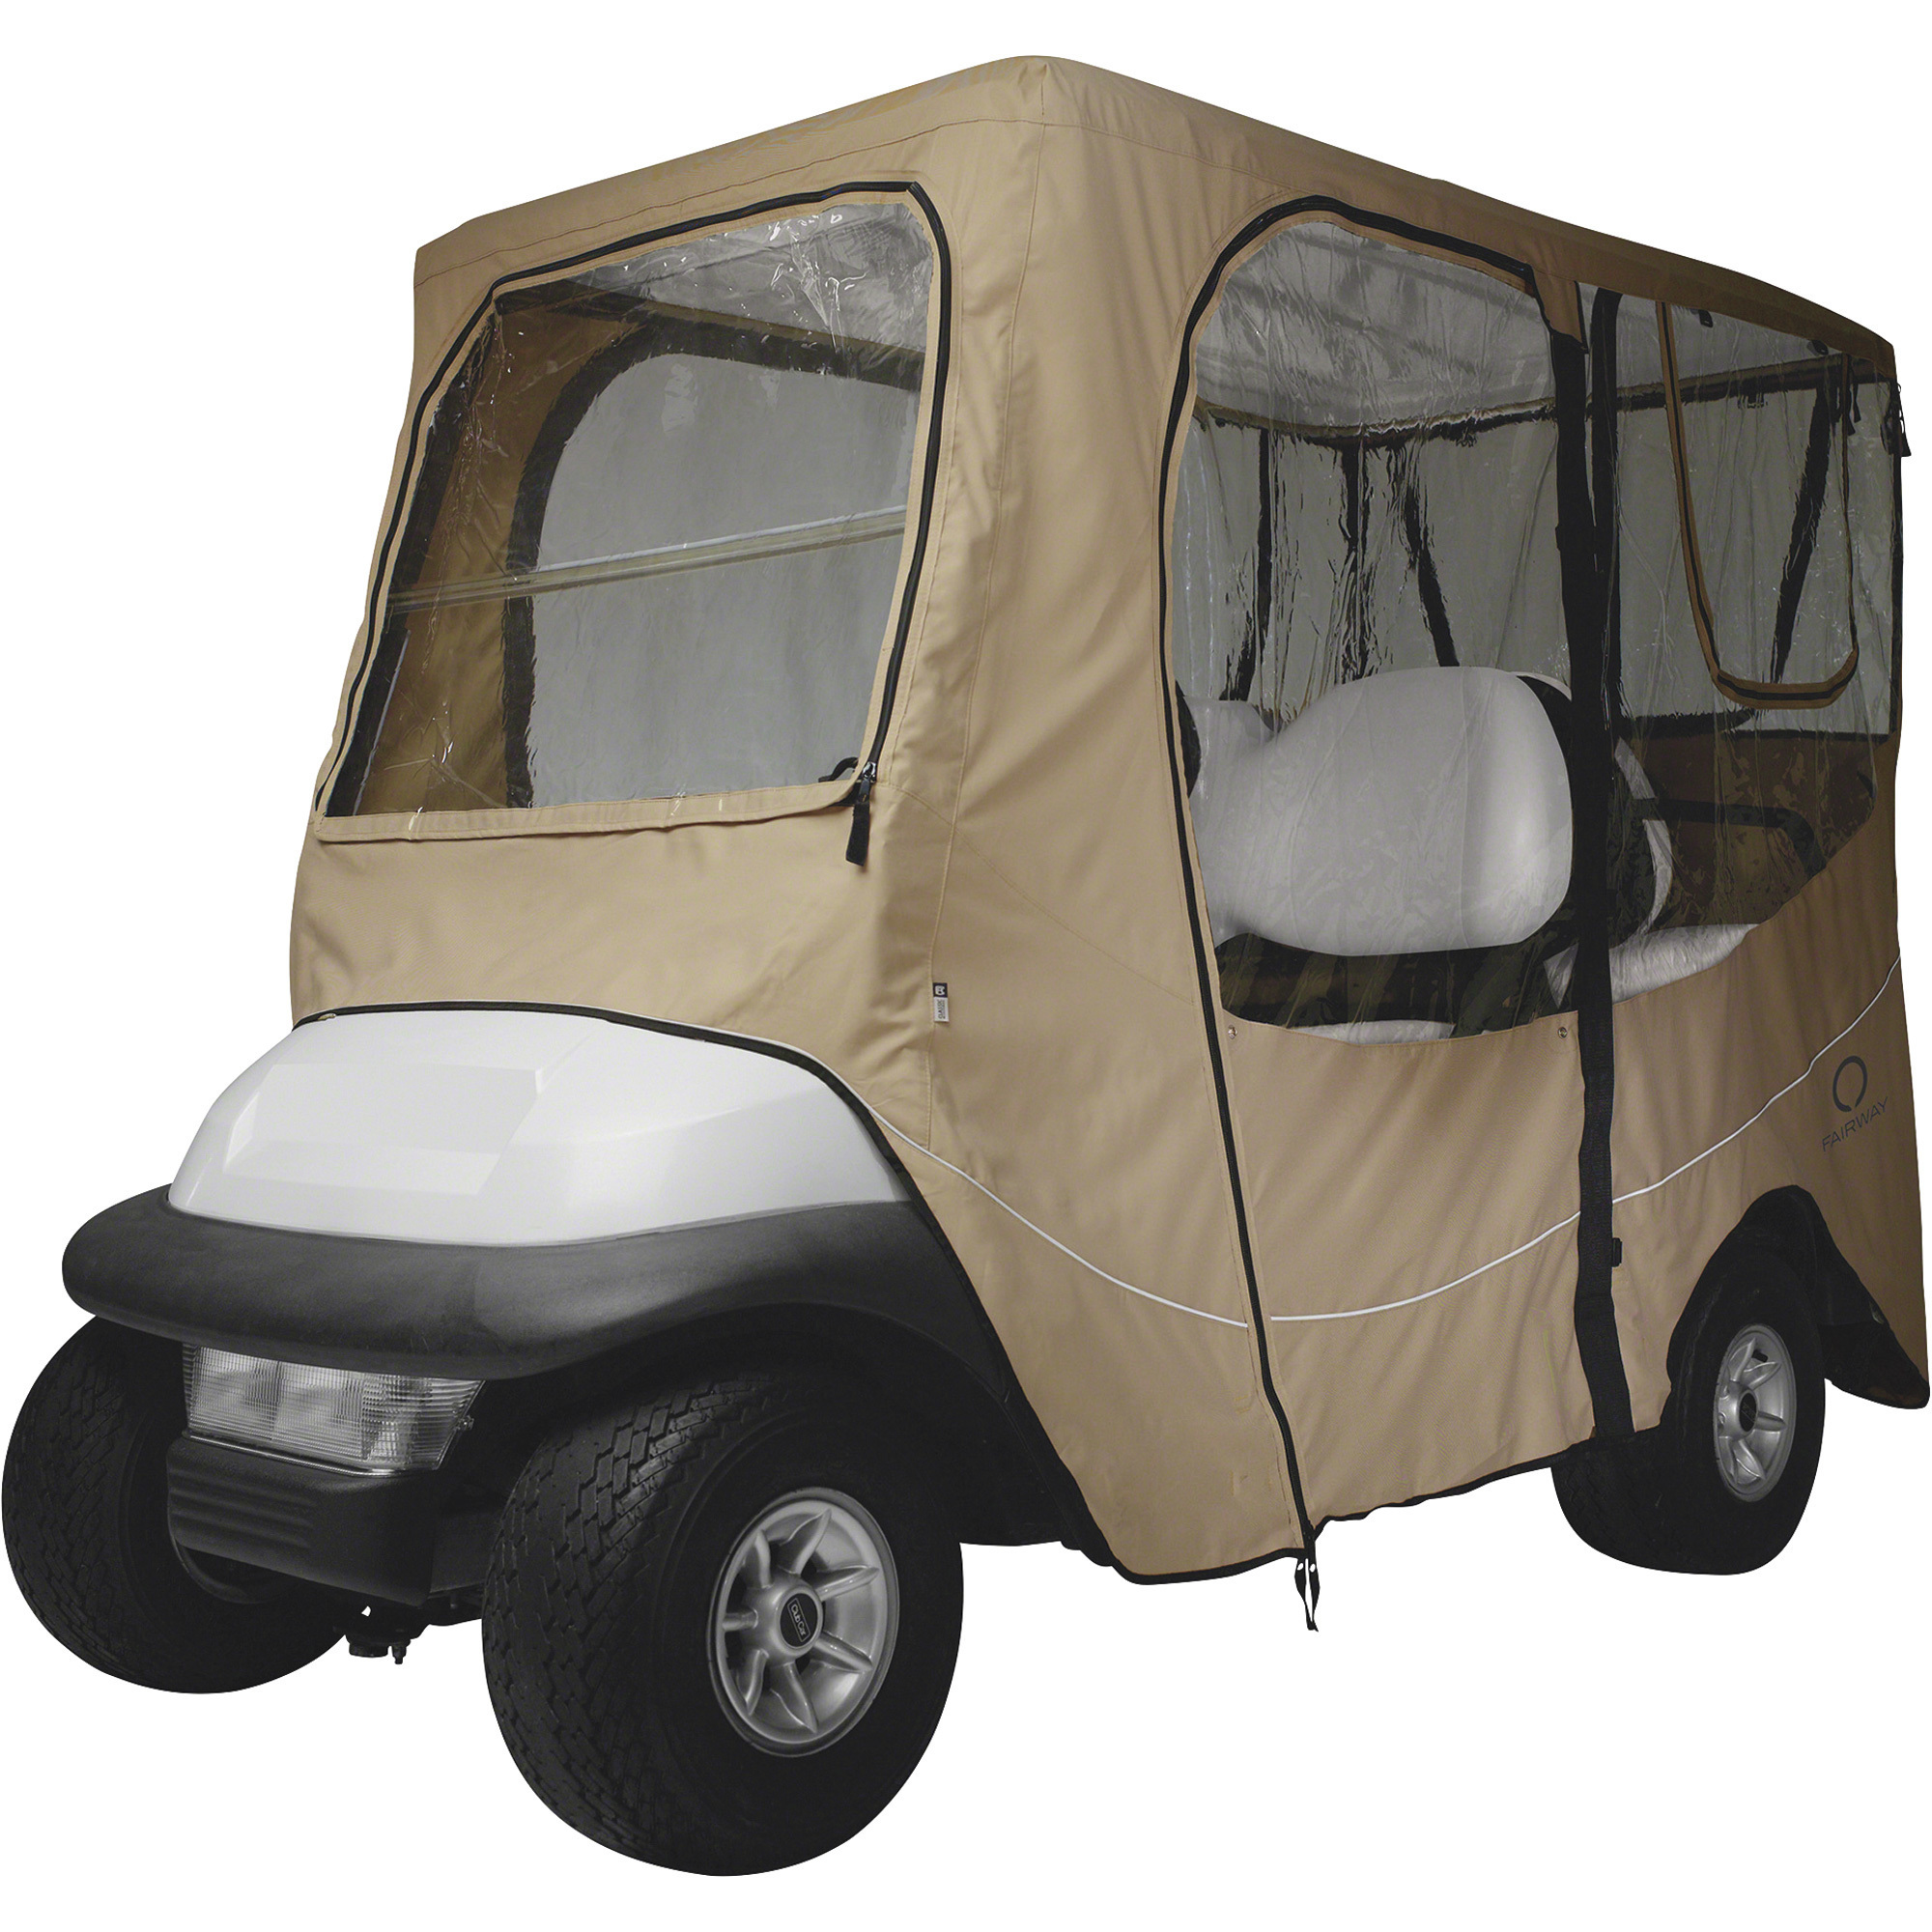 Classic Accessories Fairway Deluxe Golf Car Enclosure, Long Roof (Up to 80Inch L), Light Khaki, Model 40-050-345801-00